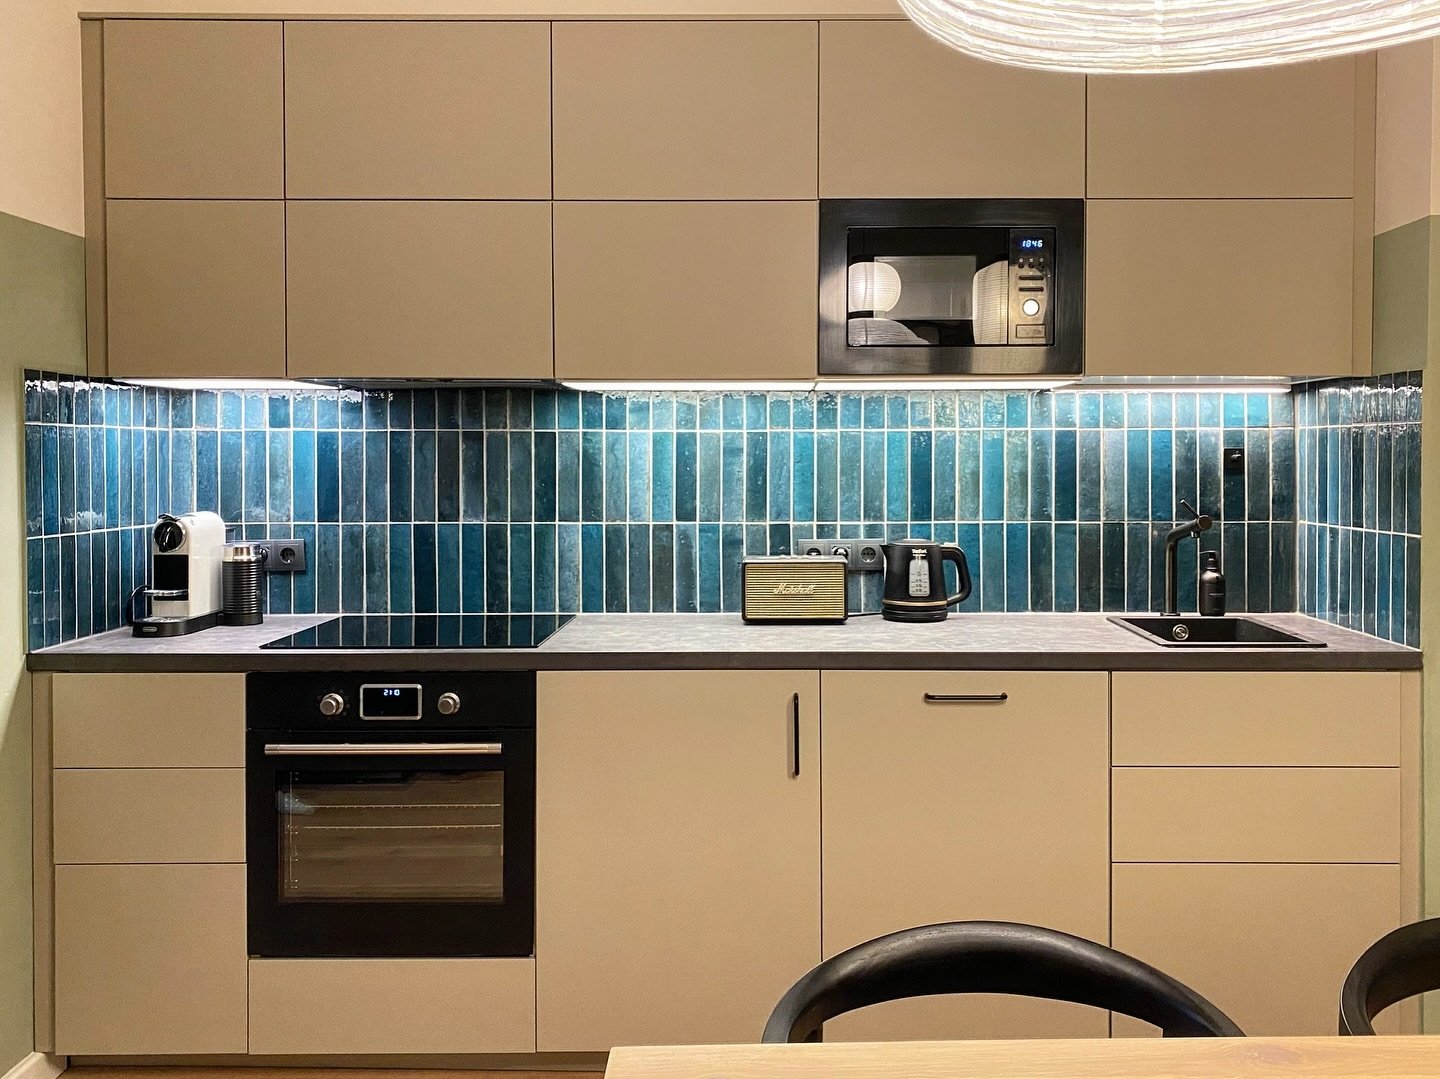 Bringing a touch of the Mediterranean with these vibrant blue tiles in our latest kitchen renovation! 💙🌊 #MediterraneanVibes #KitchenDesign #BlueTiles